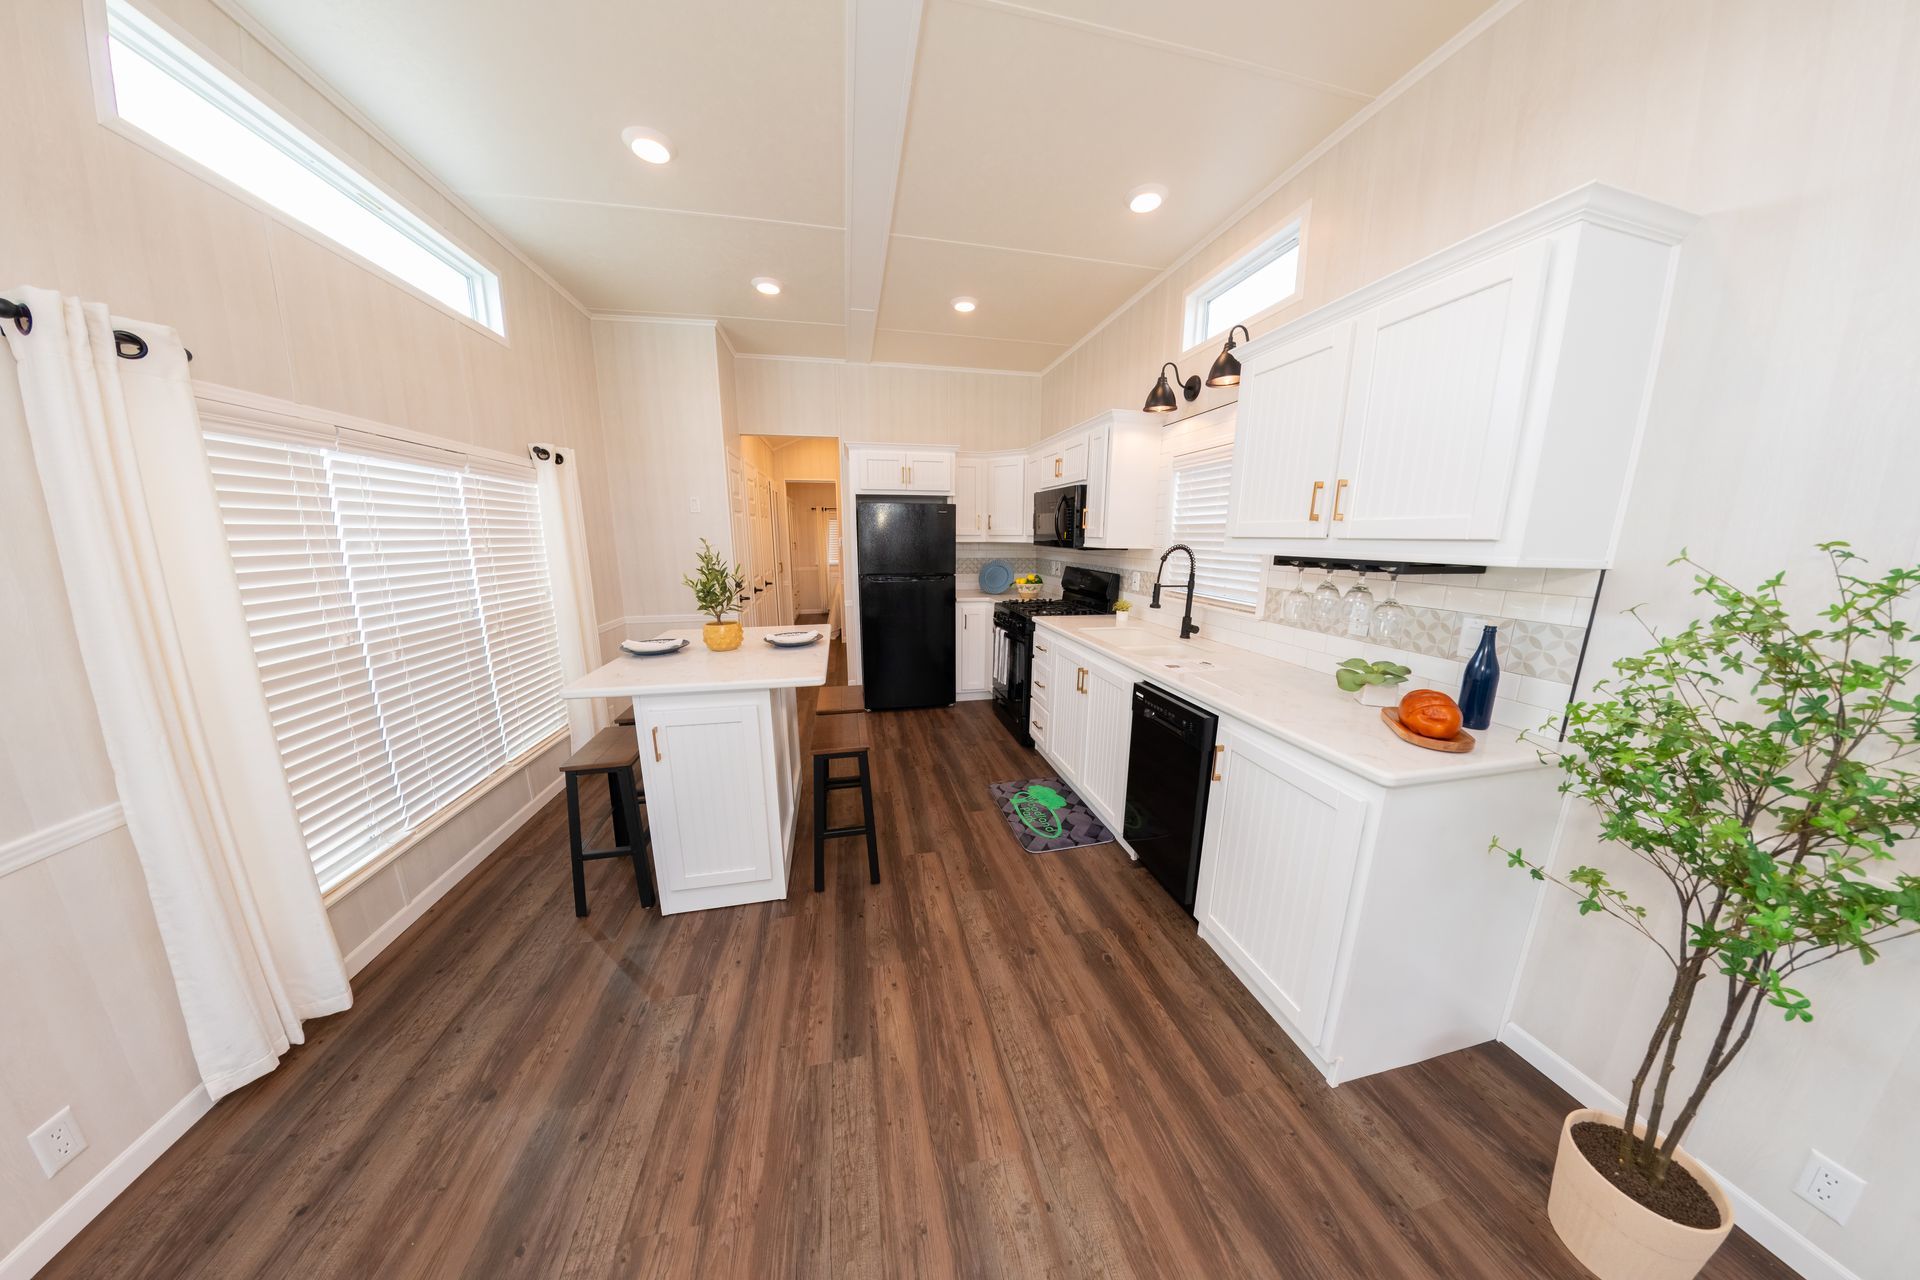 a kitchen in a mobile home with wooden floors and white cabinets .